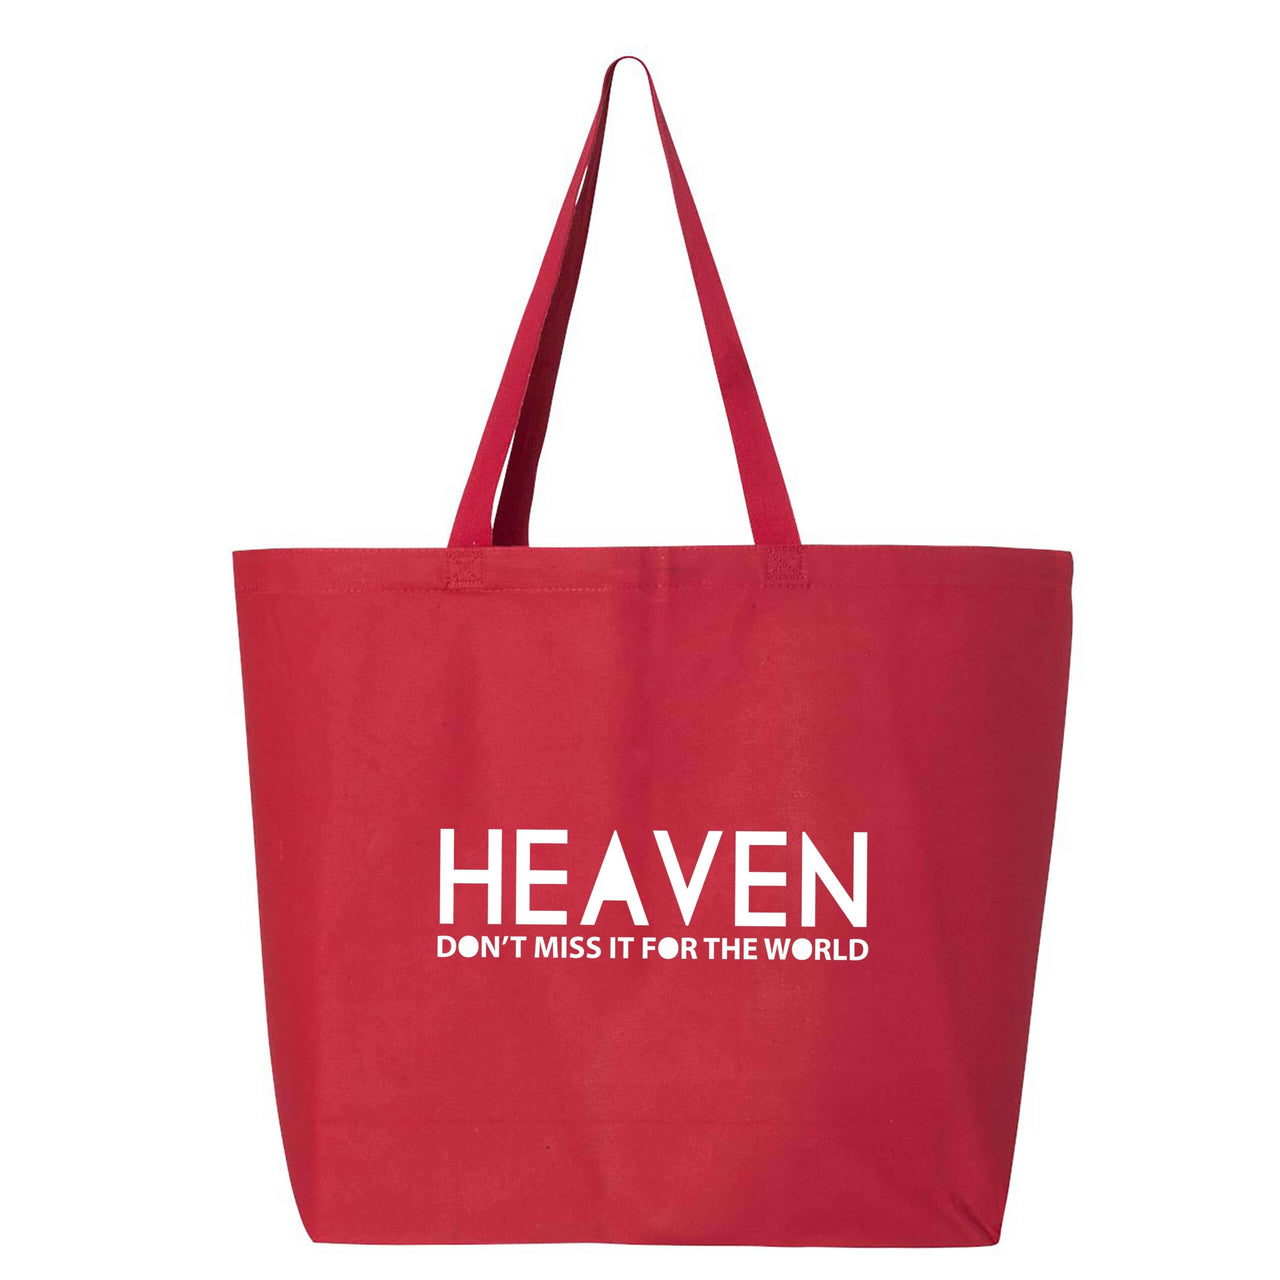 Heaven Don't Miss It For The World Jumbo Tote Canvas Bag